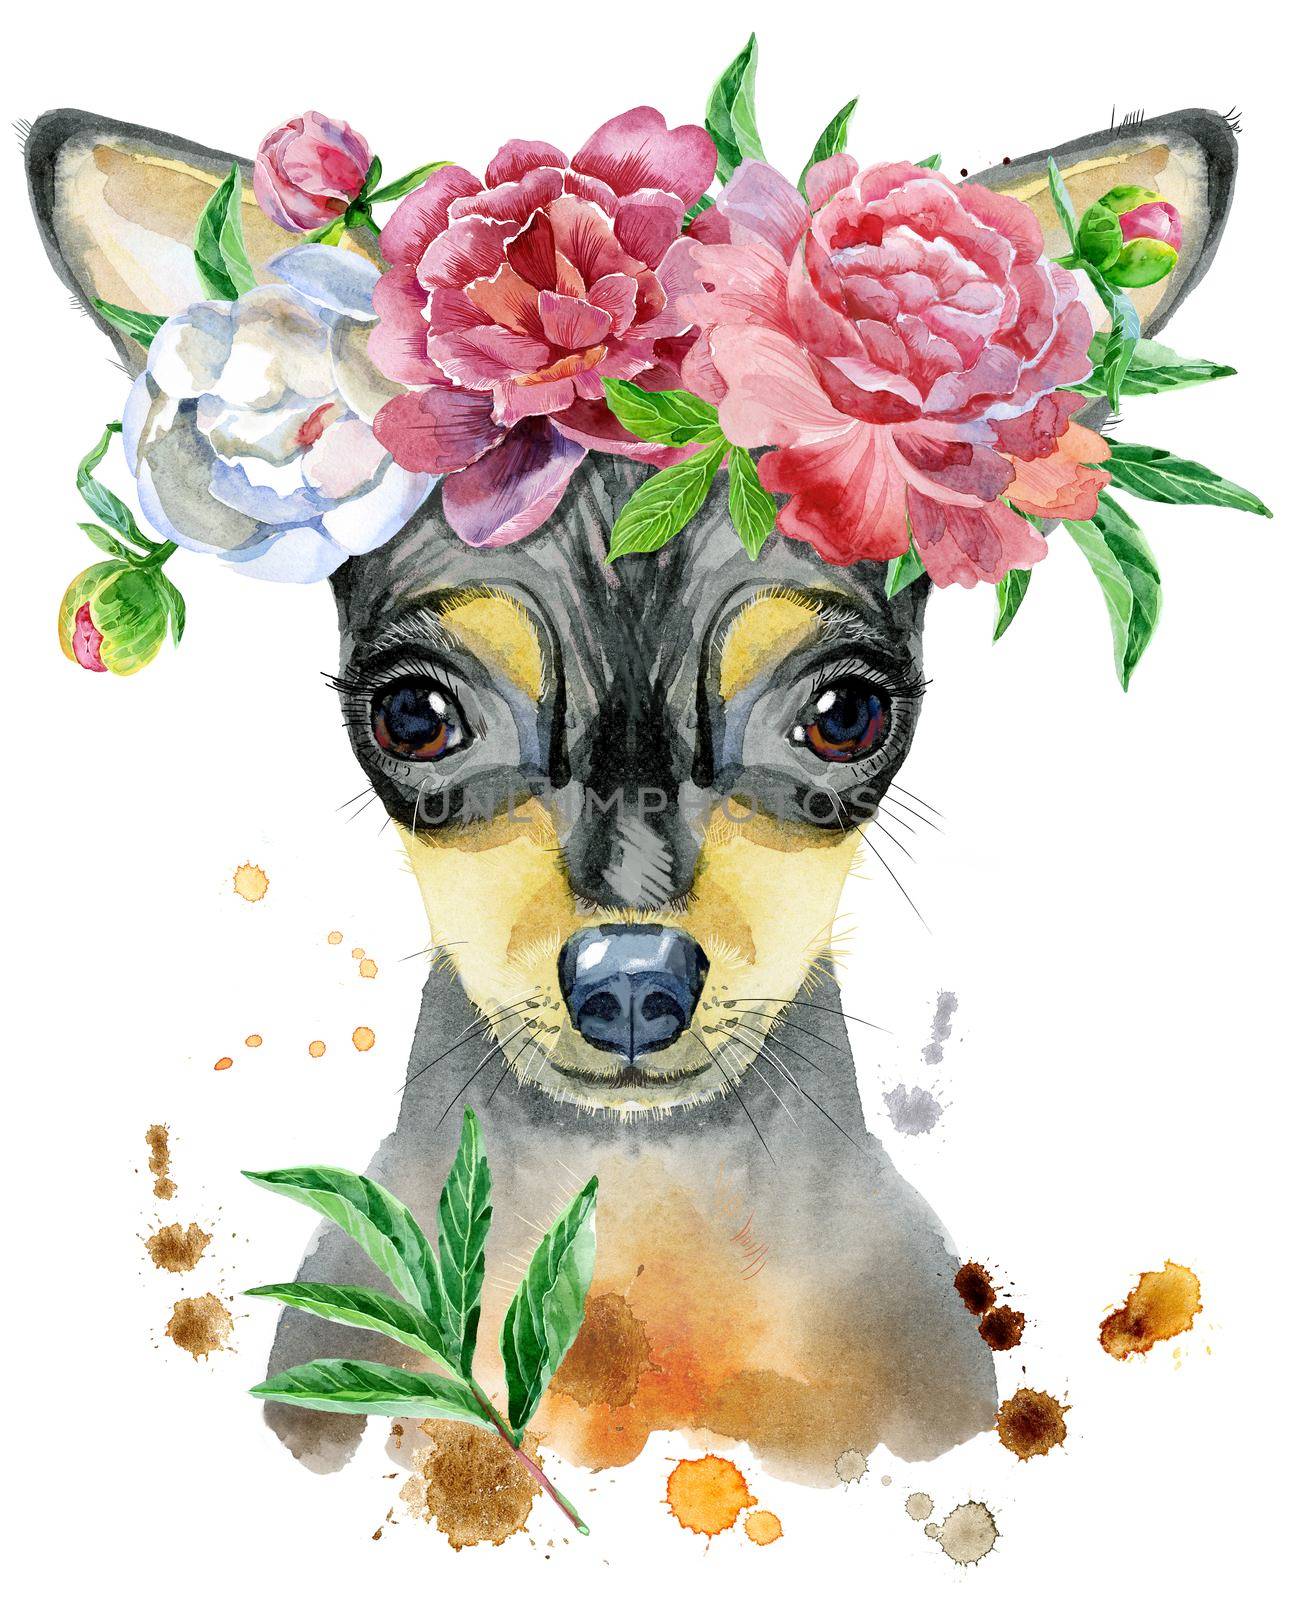 Cute Dog. Dog T-shirt graphics. watercolor toy terrier in a wreath of peonies illustration